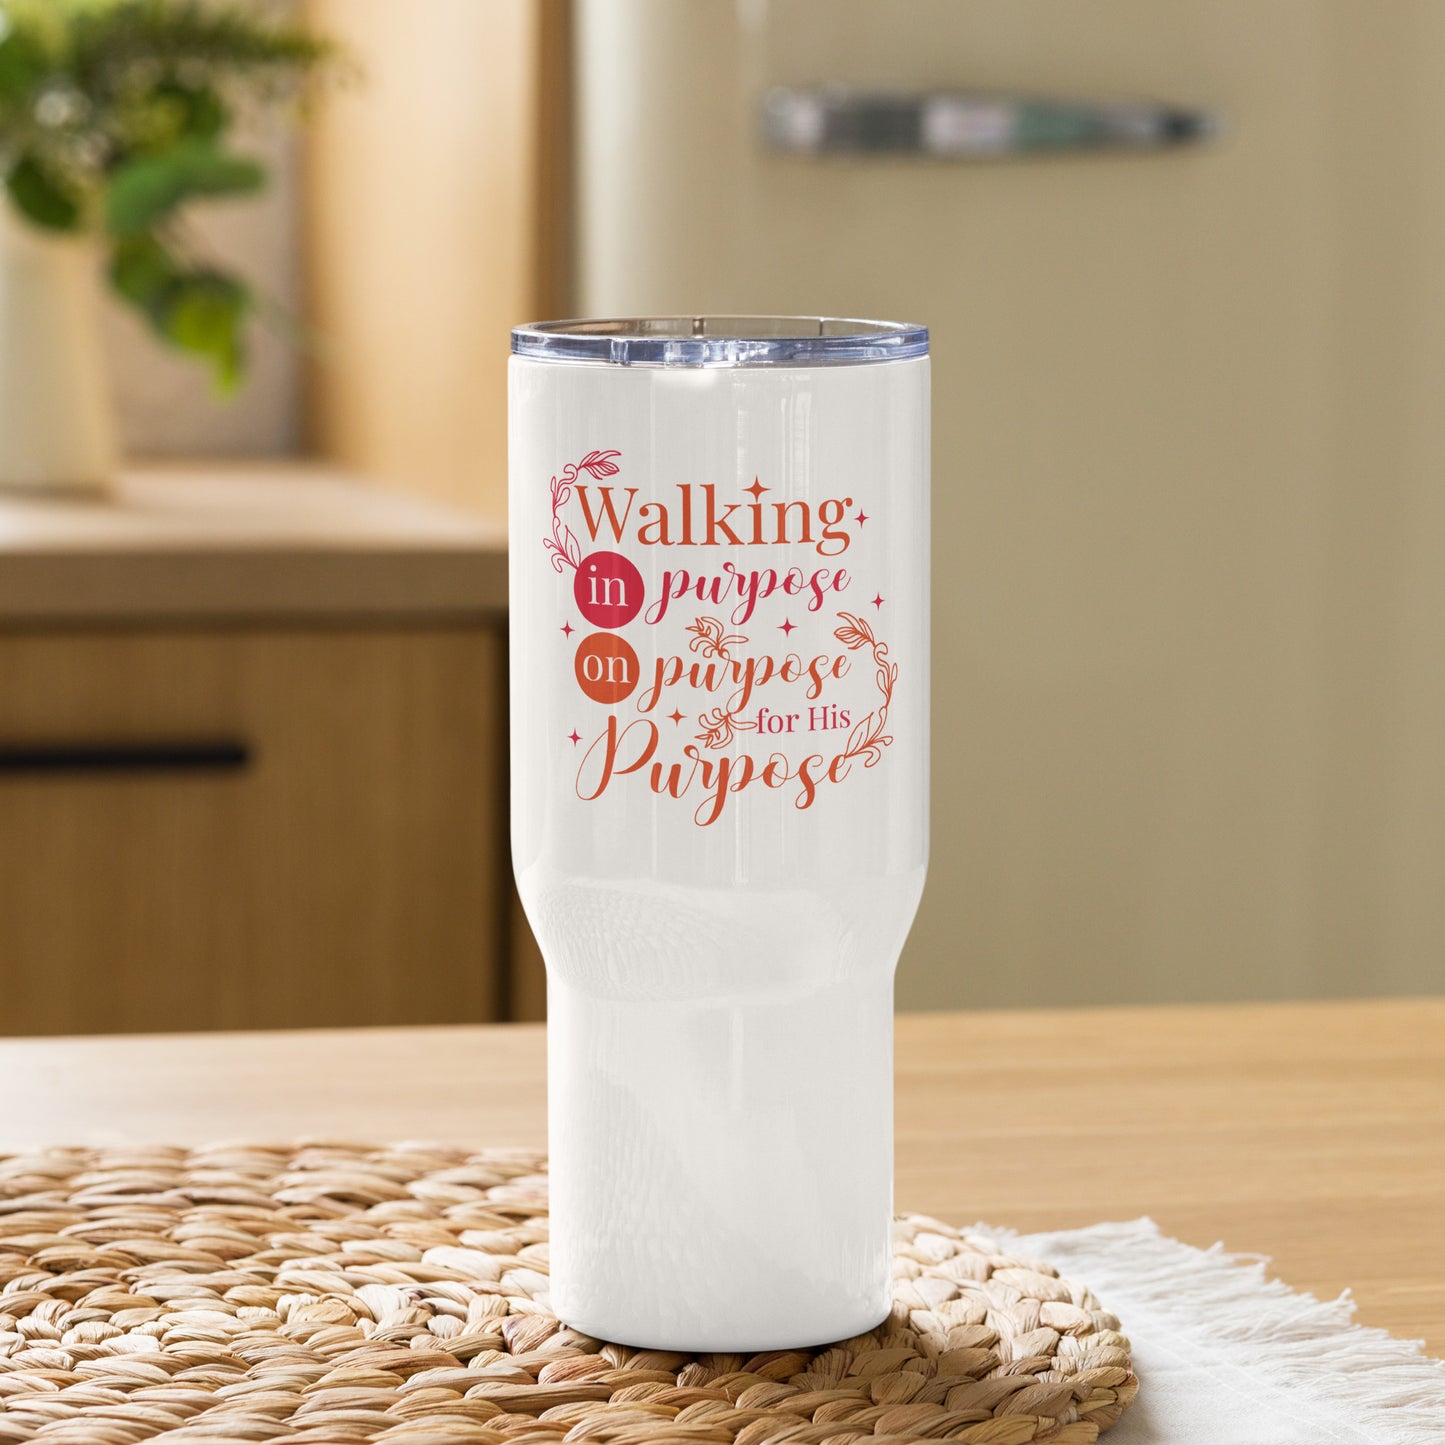 Walking In Purpose On Purpose For His Purpose Christian Travel mug with a handle